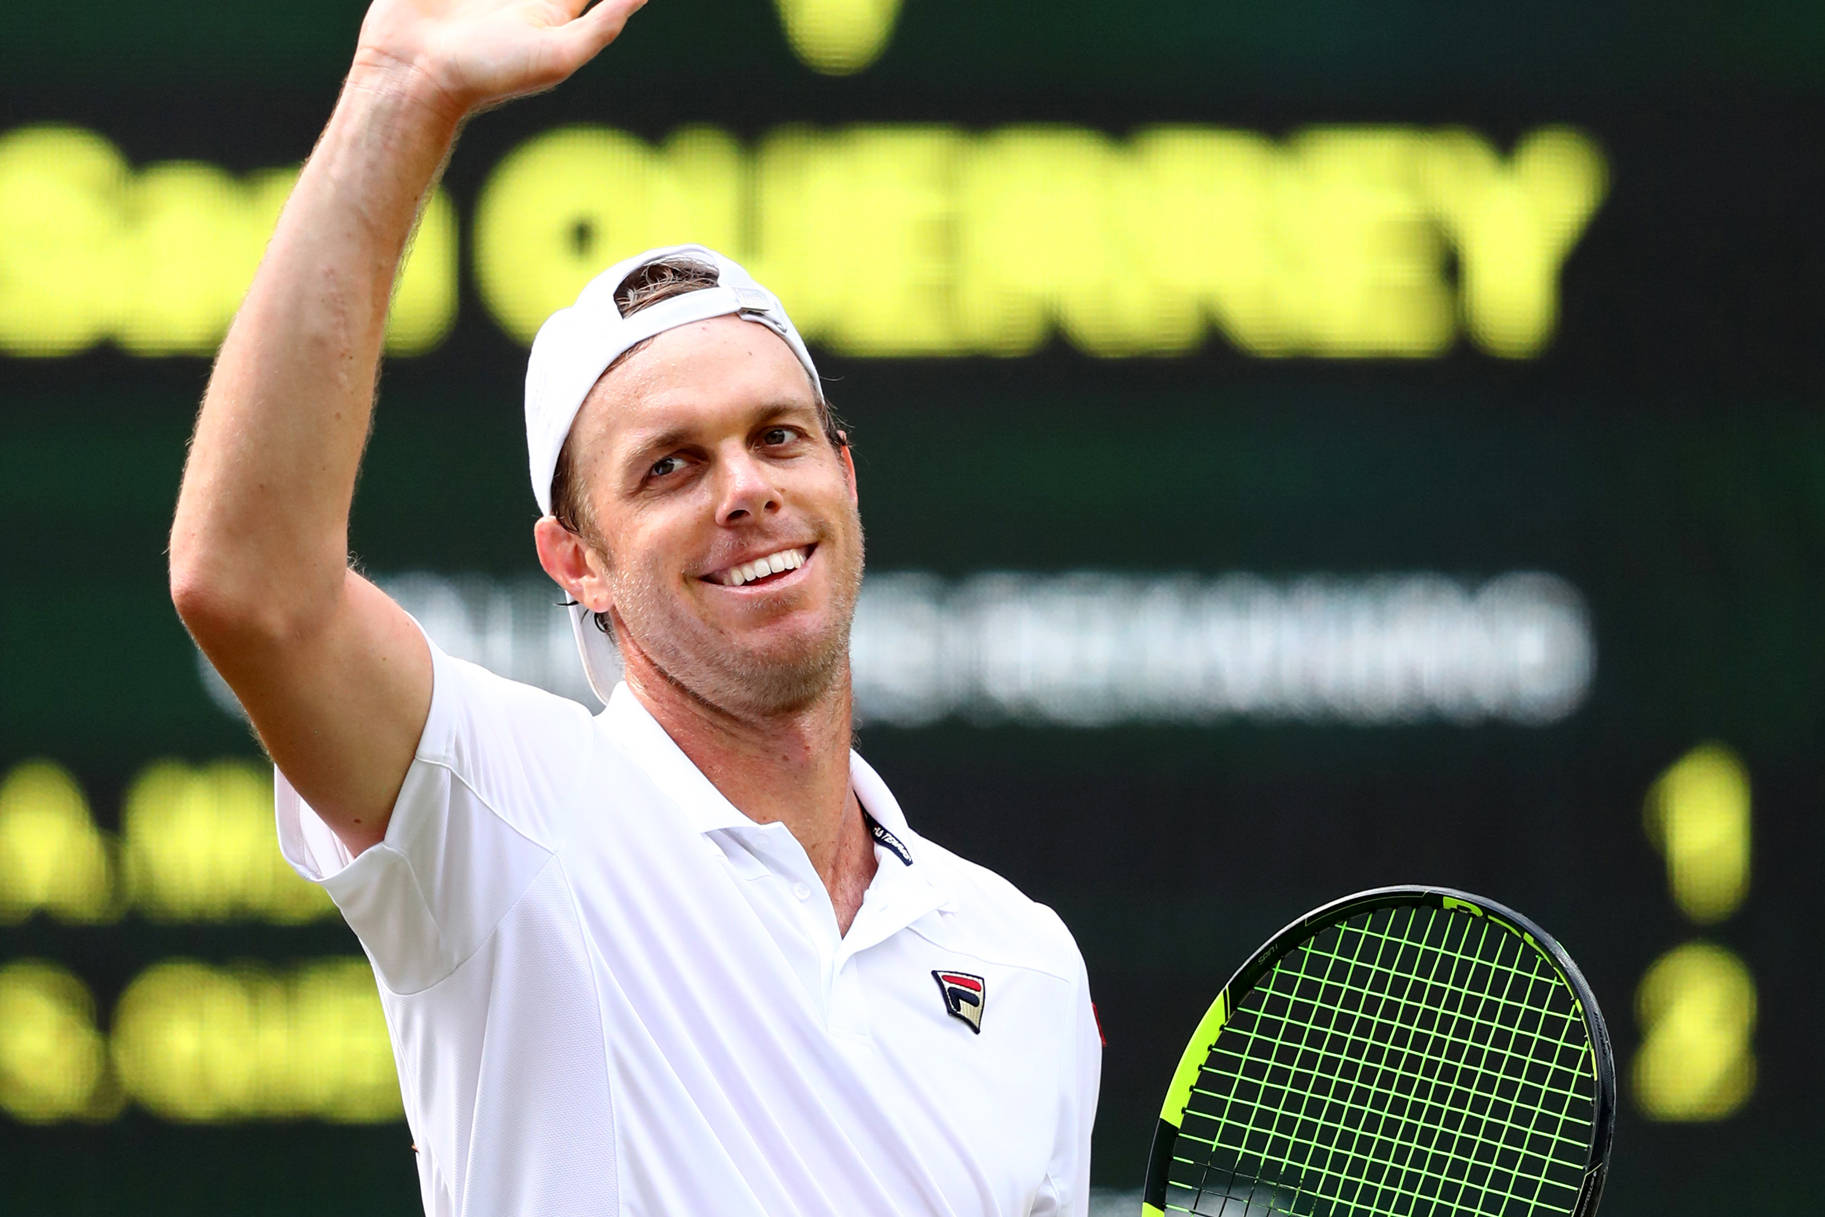 "Sam Querrey Waving to the Crowd on the Tennis Court" Wallpaper